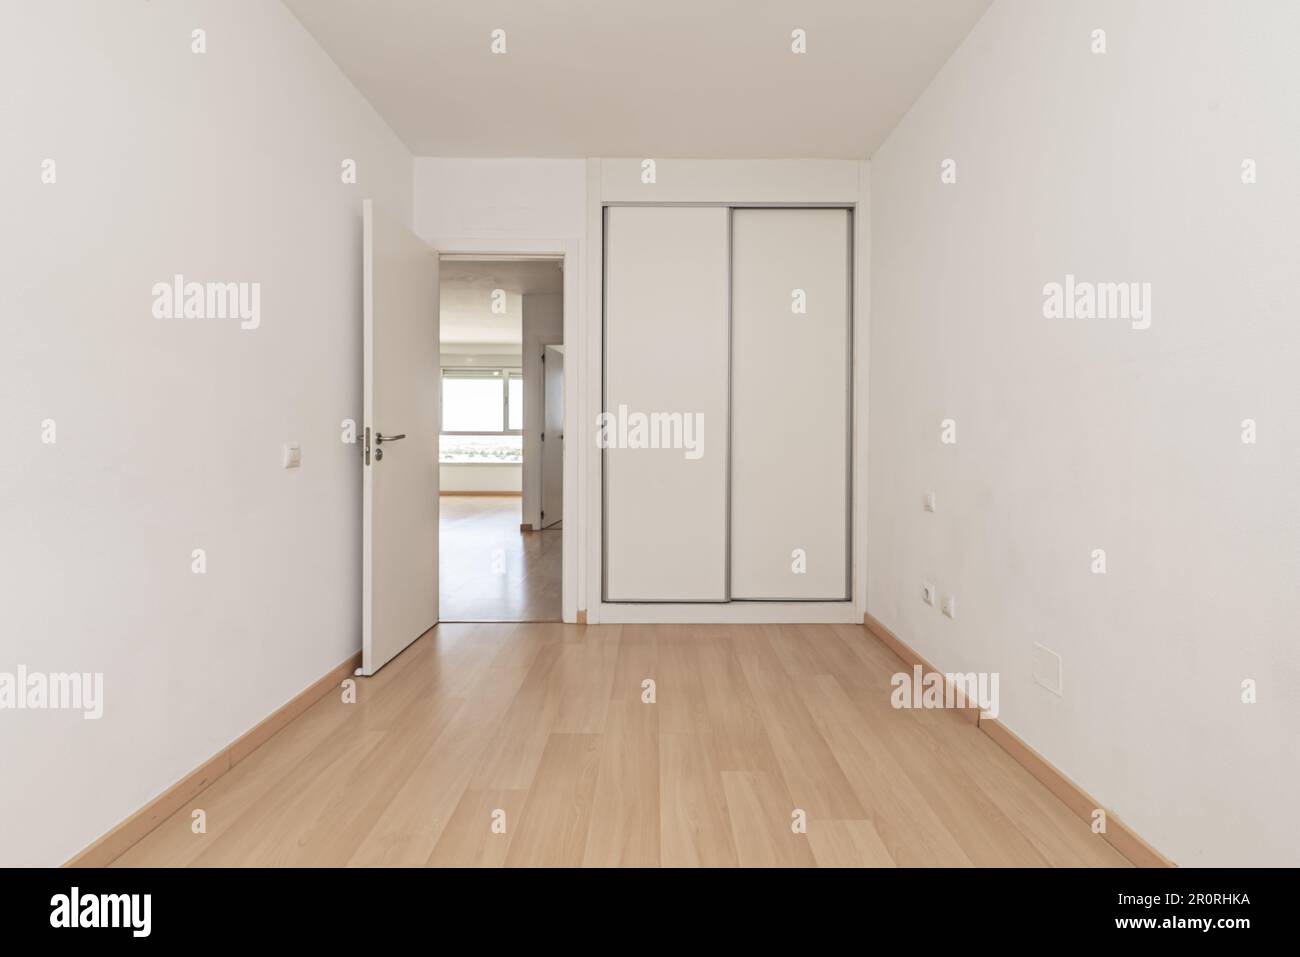 An empty room in an apartment with a built-in wardrobe with white sliding doors, a light wooden floor and white access doors, plain walls and wooden b Stock Photo